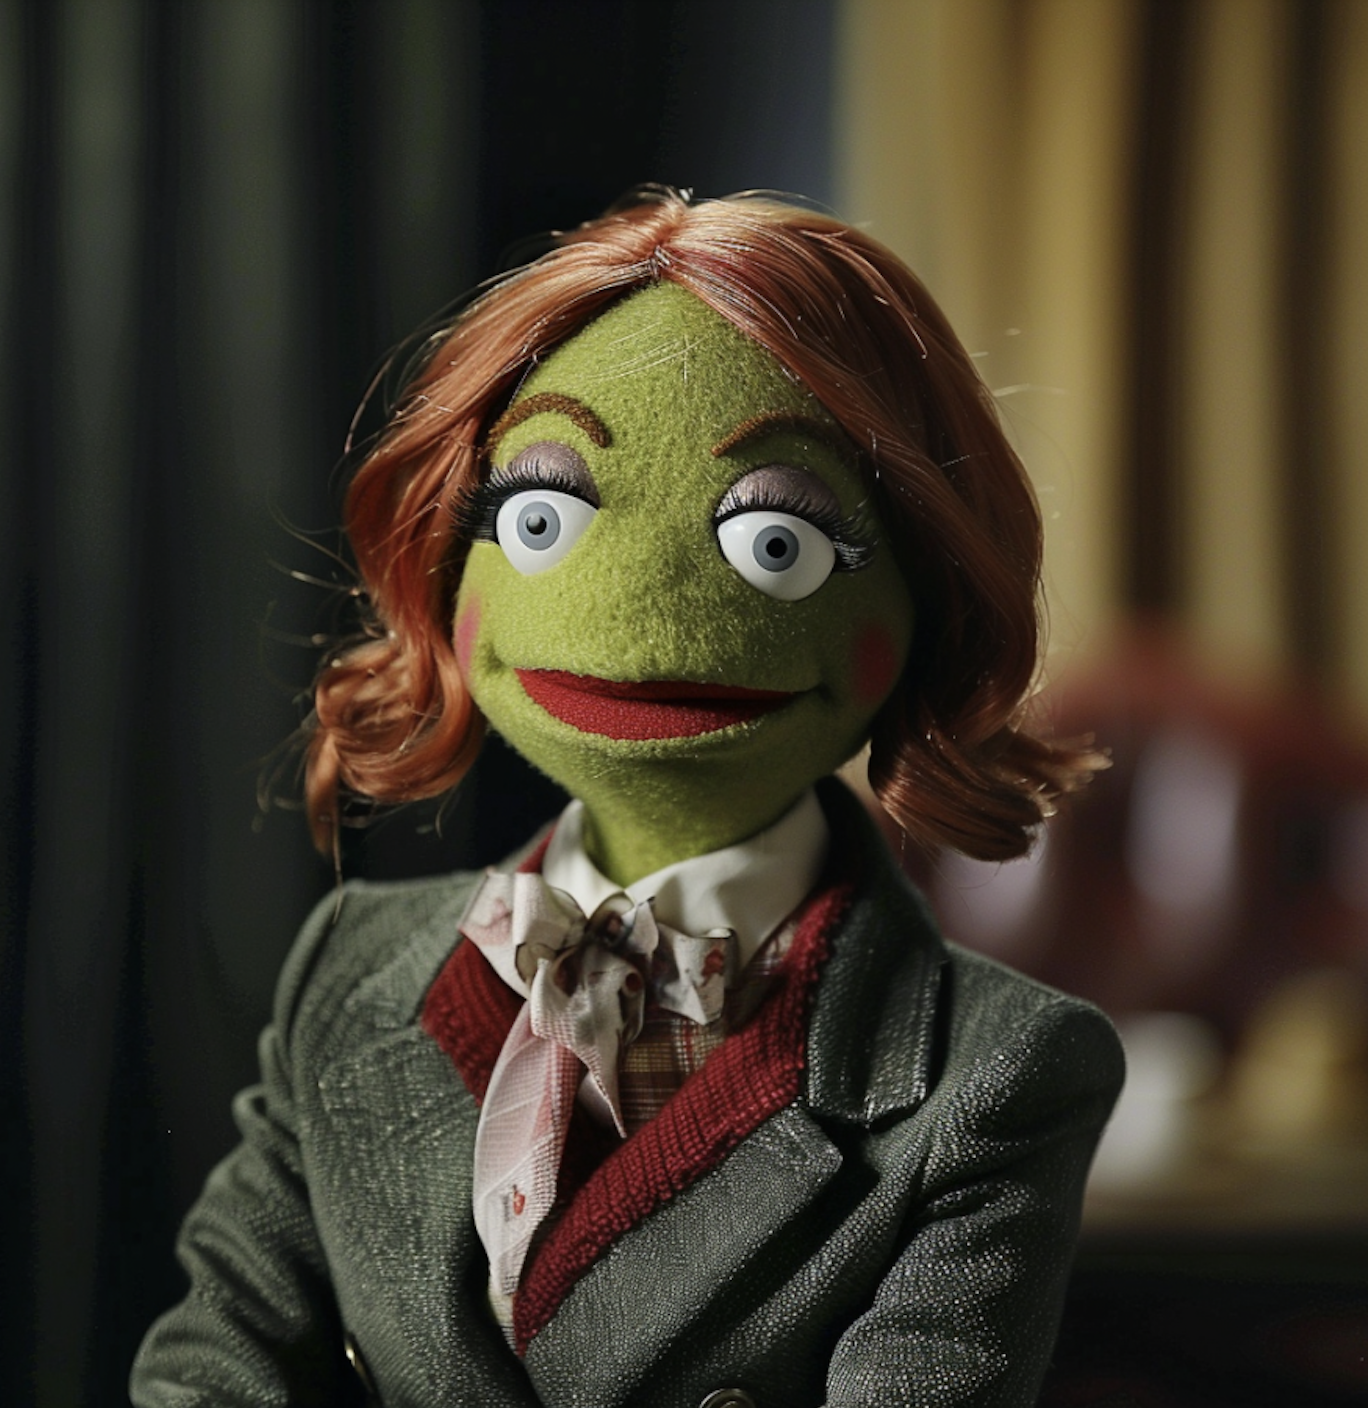 Emma Stone as a muppet, with green skin and red hair and in a suit